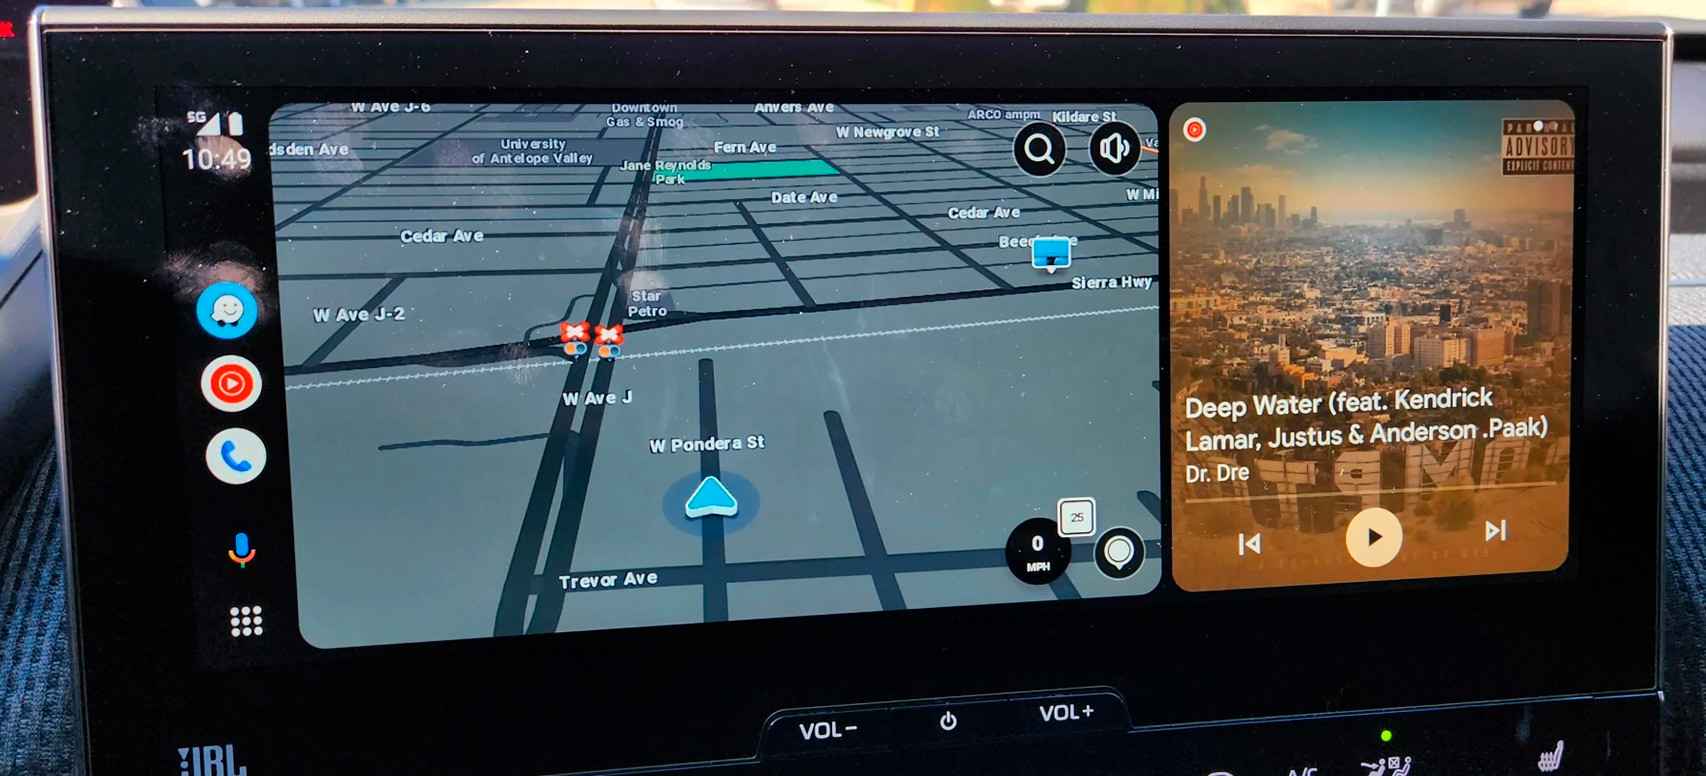 Waze with Android Auto Coolwalk support